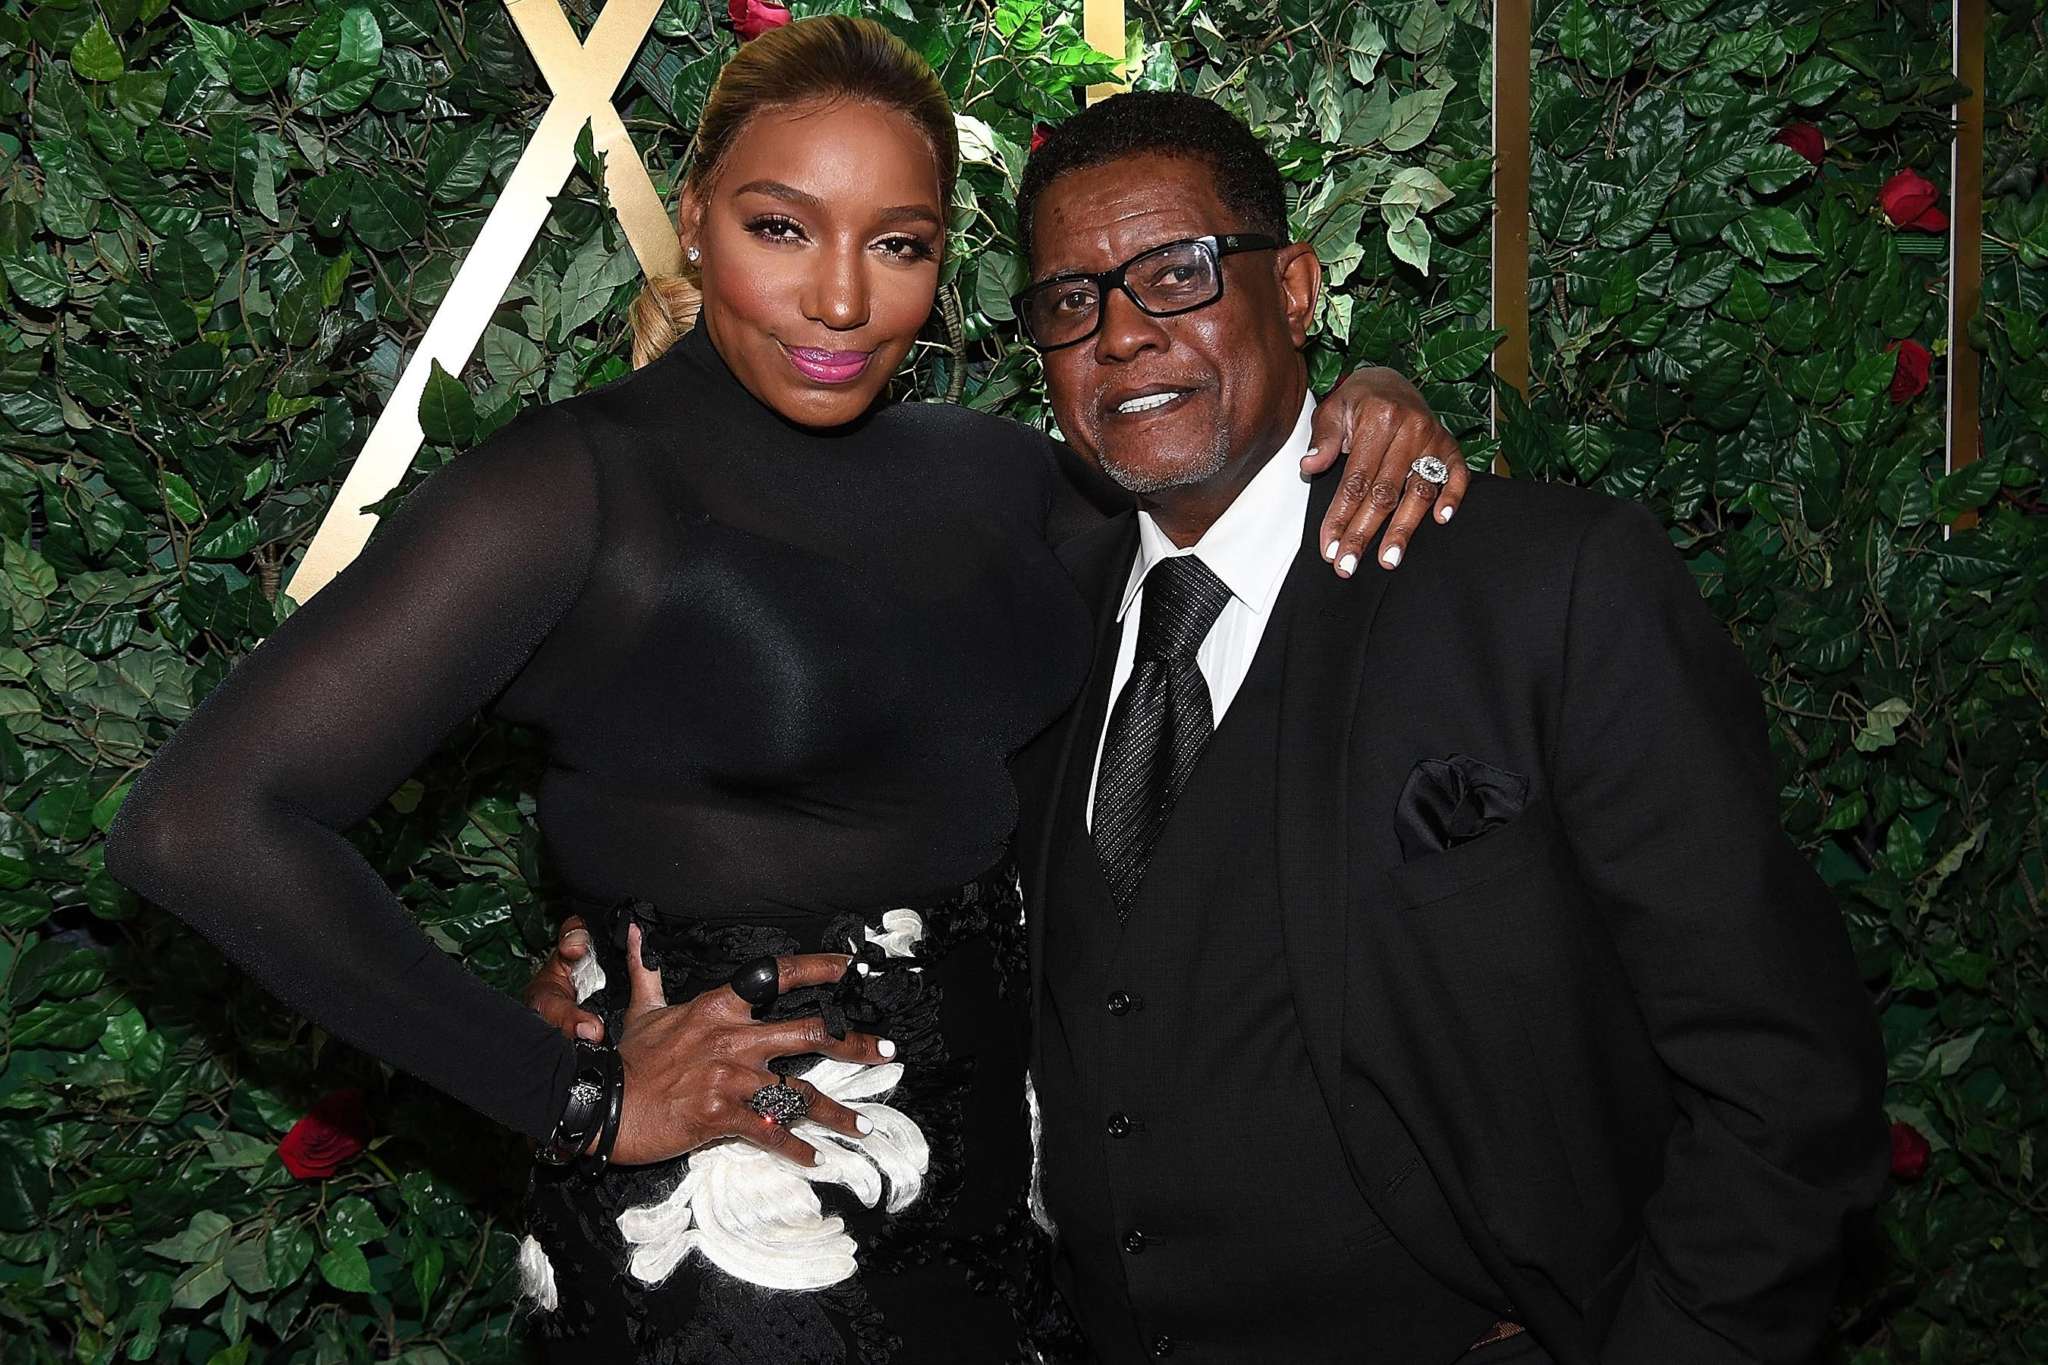 NeNe Leakes Kills Rumors Claiming That She And Gregg Leakes Broke Up - See The Sweet Pics Of The Couple